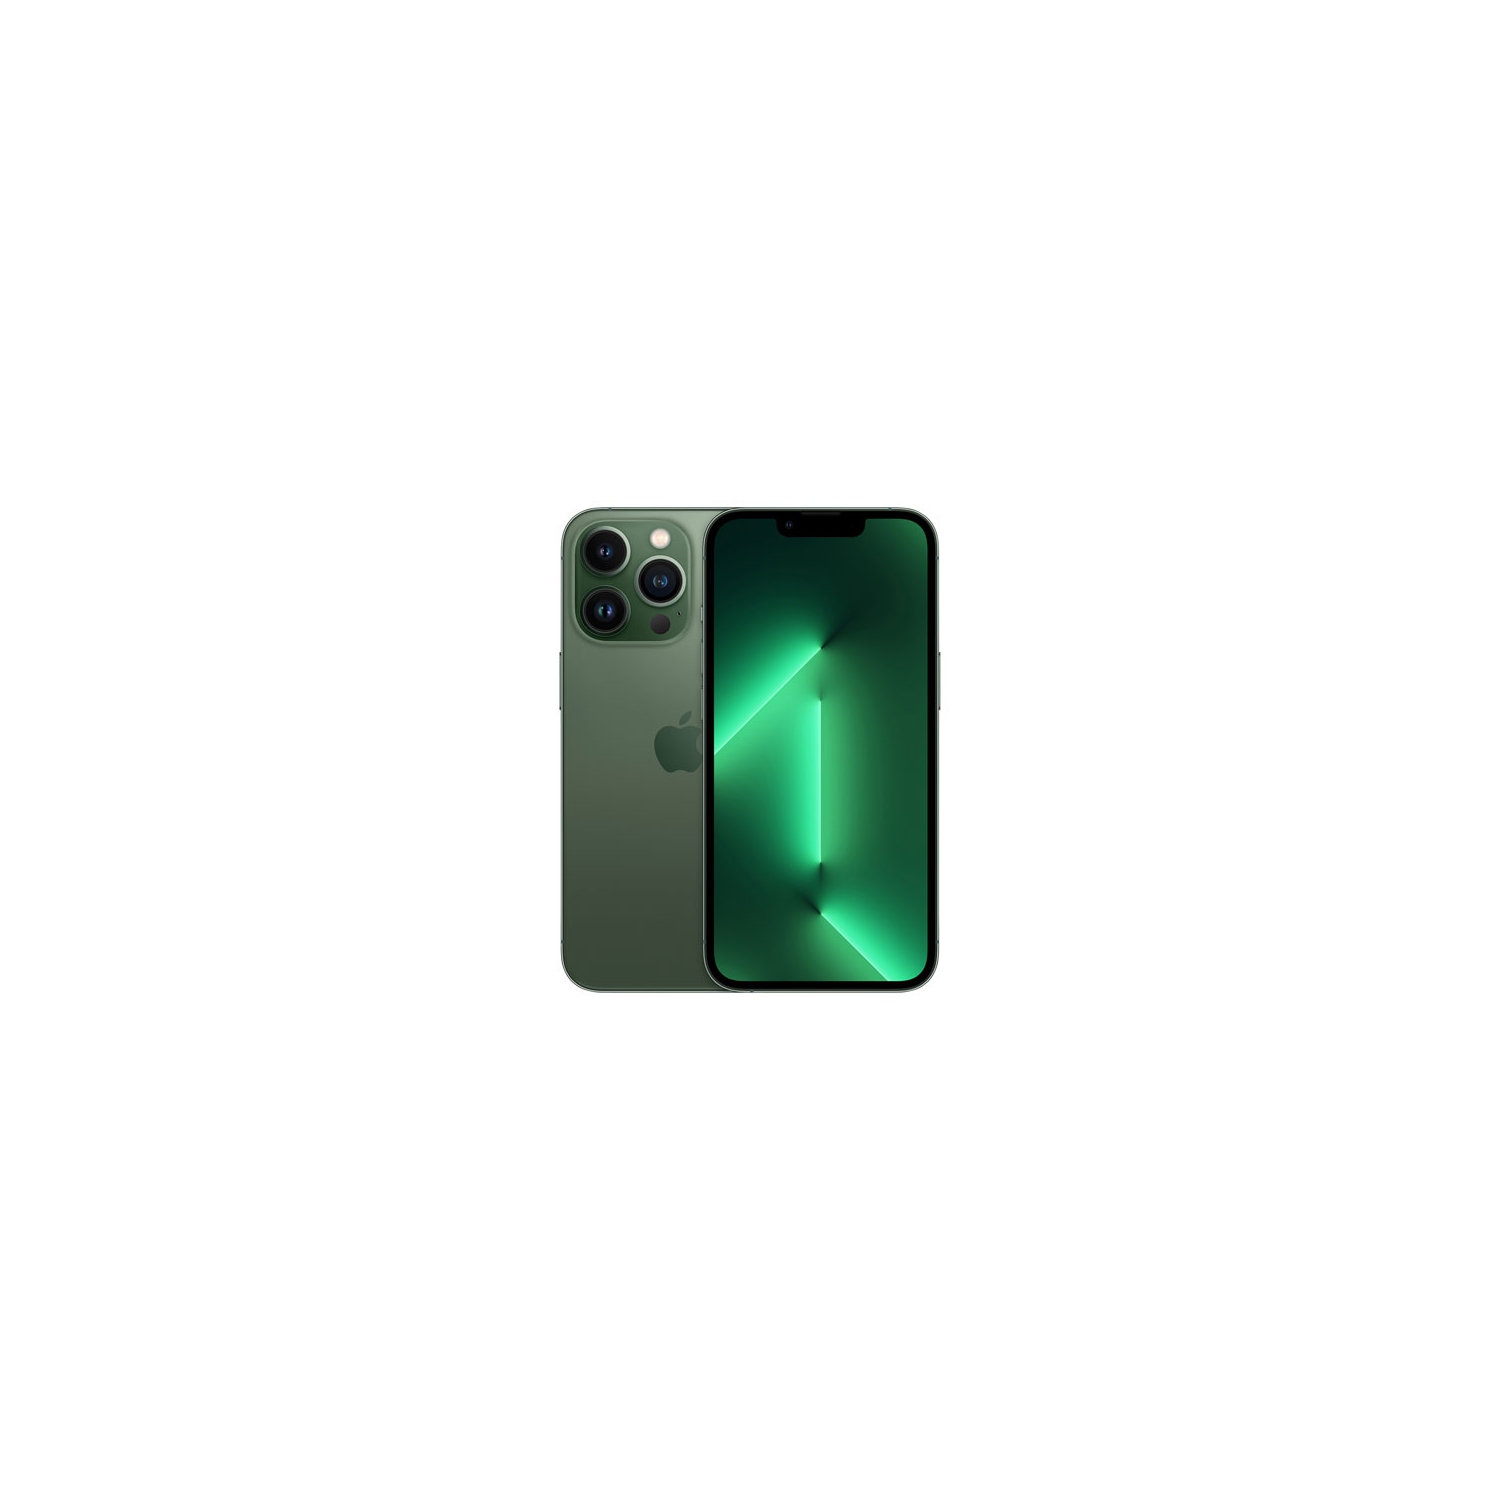 Apple iPhone 13 Pro Max | 128GB – Smartphone - Alpine Green - Unlocked - Open Box- Certified Pre-owned